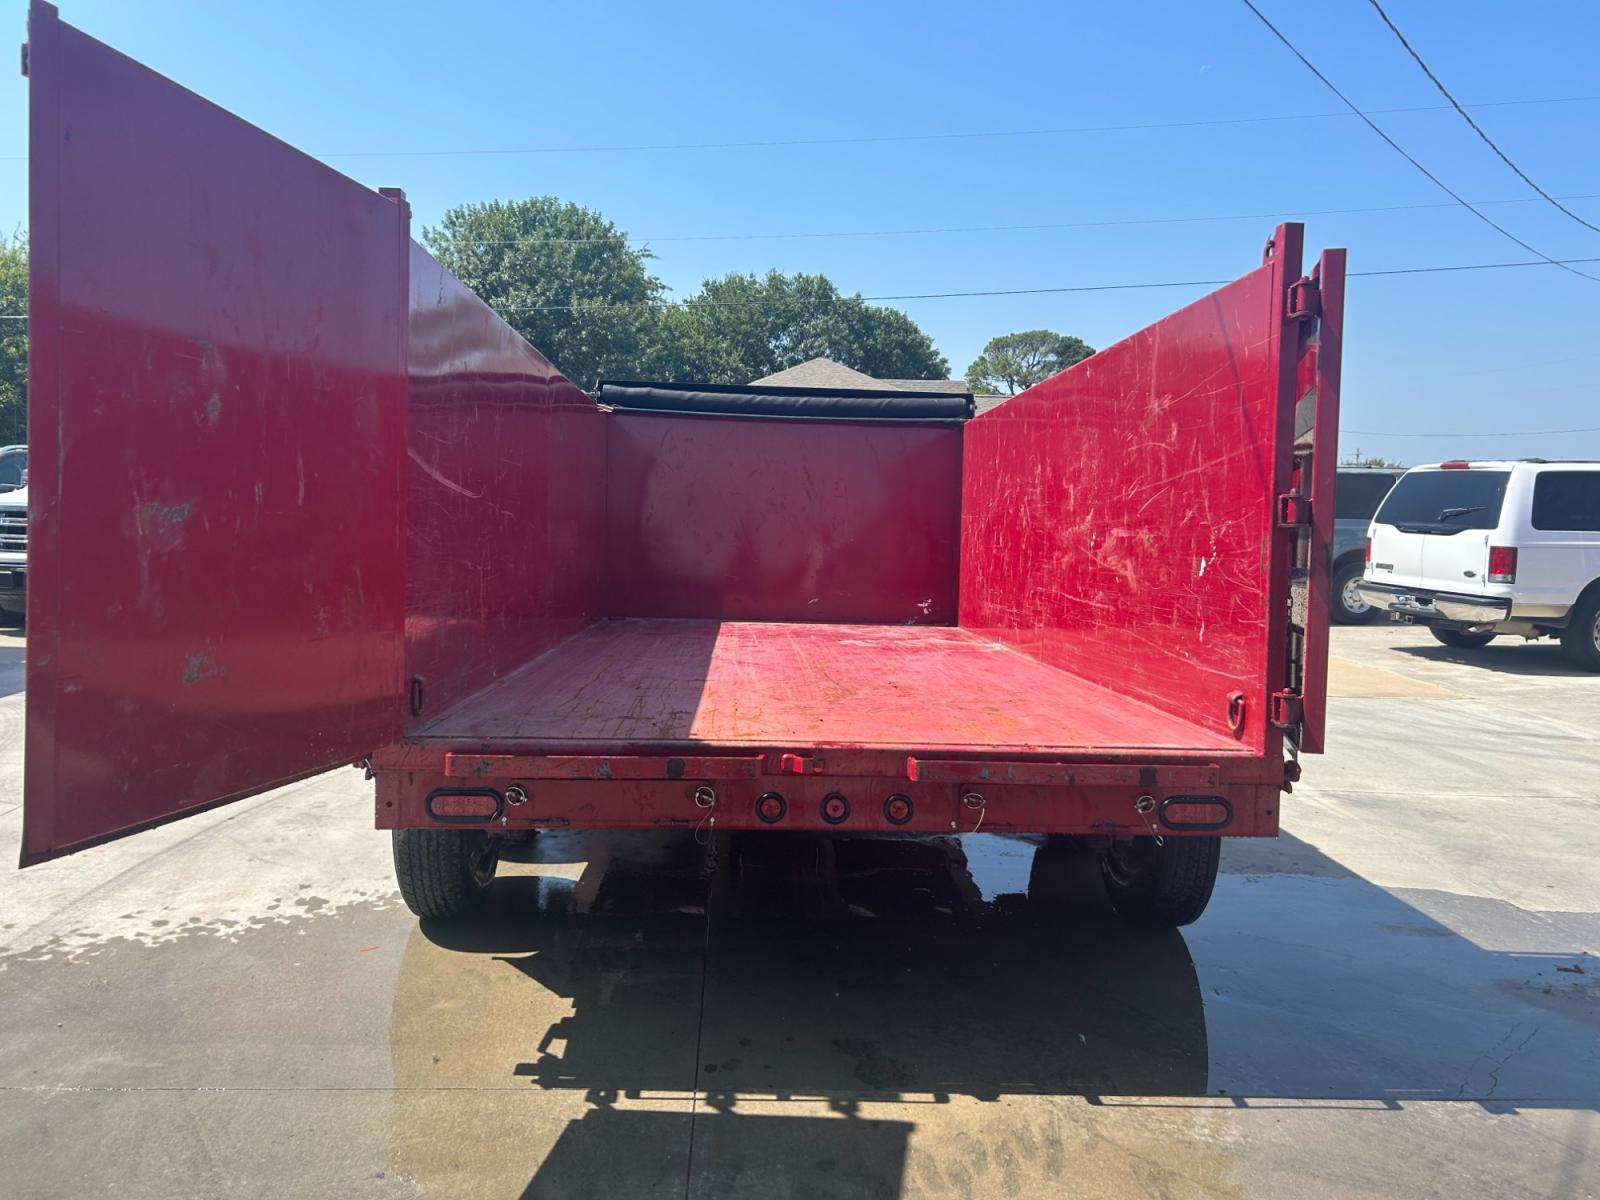 2022 RED EAST TEXAS TRAILER DUMPBED (58SBD1420NE) , located at 17760 Hwy 62, Morris, OK, 74445, 35.609104, -95.877060 - 2022 SILVERLINE TRAILER 83X14 FEATURES 2 7,000 LB DEXTER SPRING AXLES, 2 ELEC FSA BRAKES, COUPLER 2-5/16" ADJUSTABLE (6 HOLE), DIAMOND PLATE FENDERS, 16" CROSS-MEMBERS, 48" DUMP SIDES, 48" 3 WAY GATE, MESH ROLL TARP SYSTEM, JACK SPRING LOADED DROP LEG, 4 3'' D-RINGS, TOOL BOX IN TONGUE, SCISSOR HOIS - Photo #8